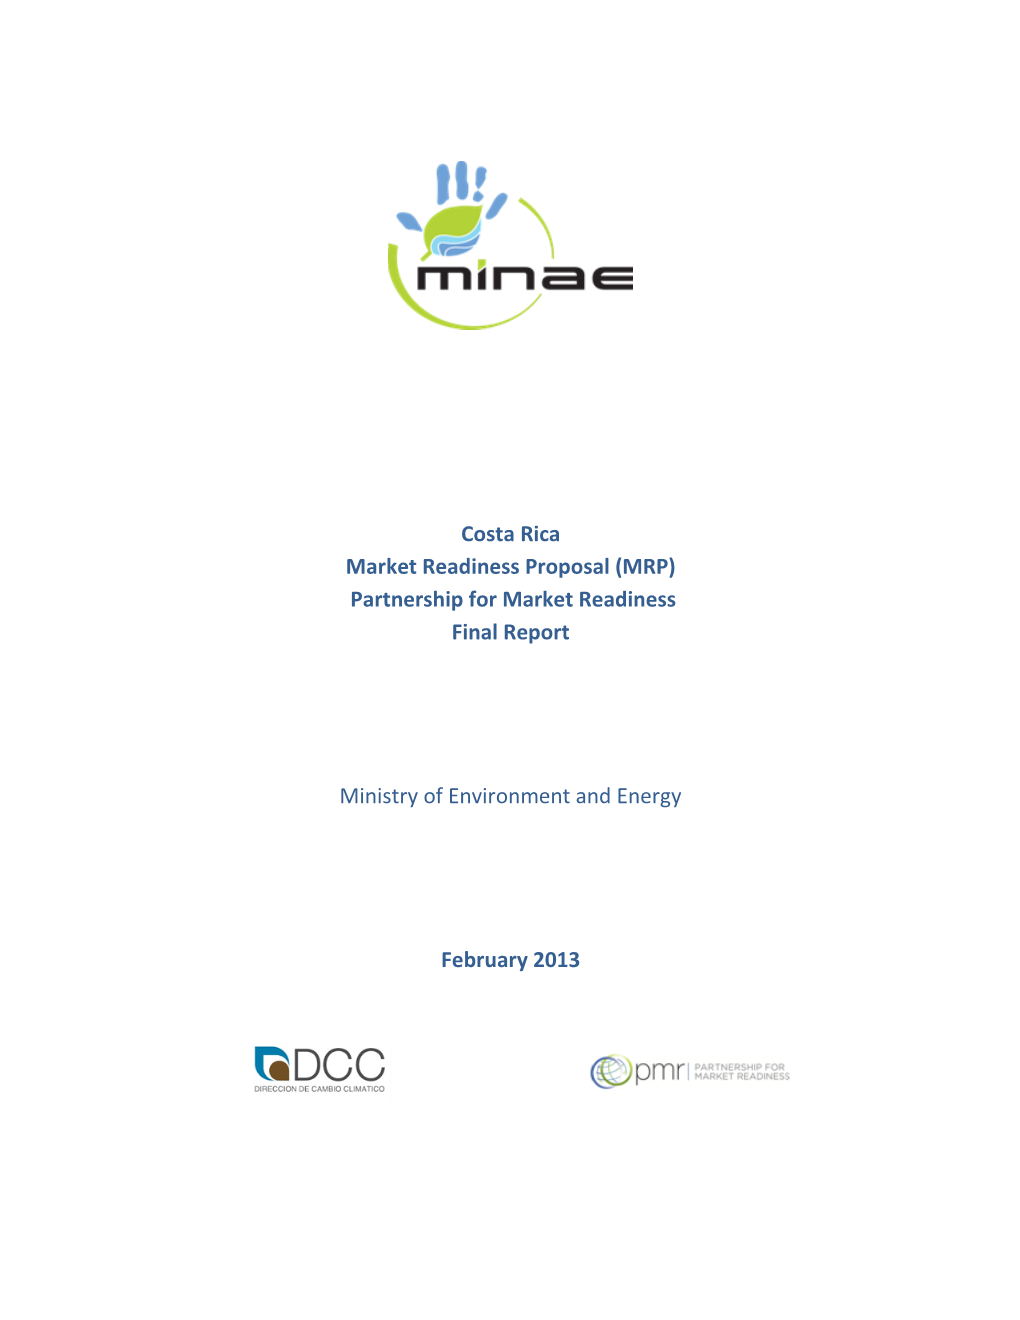 Costa Rica Market Readiness Proposal (MRP) Partnership for Market Readiness Final Report